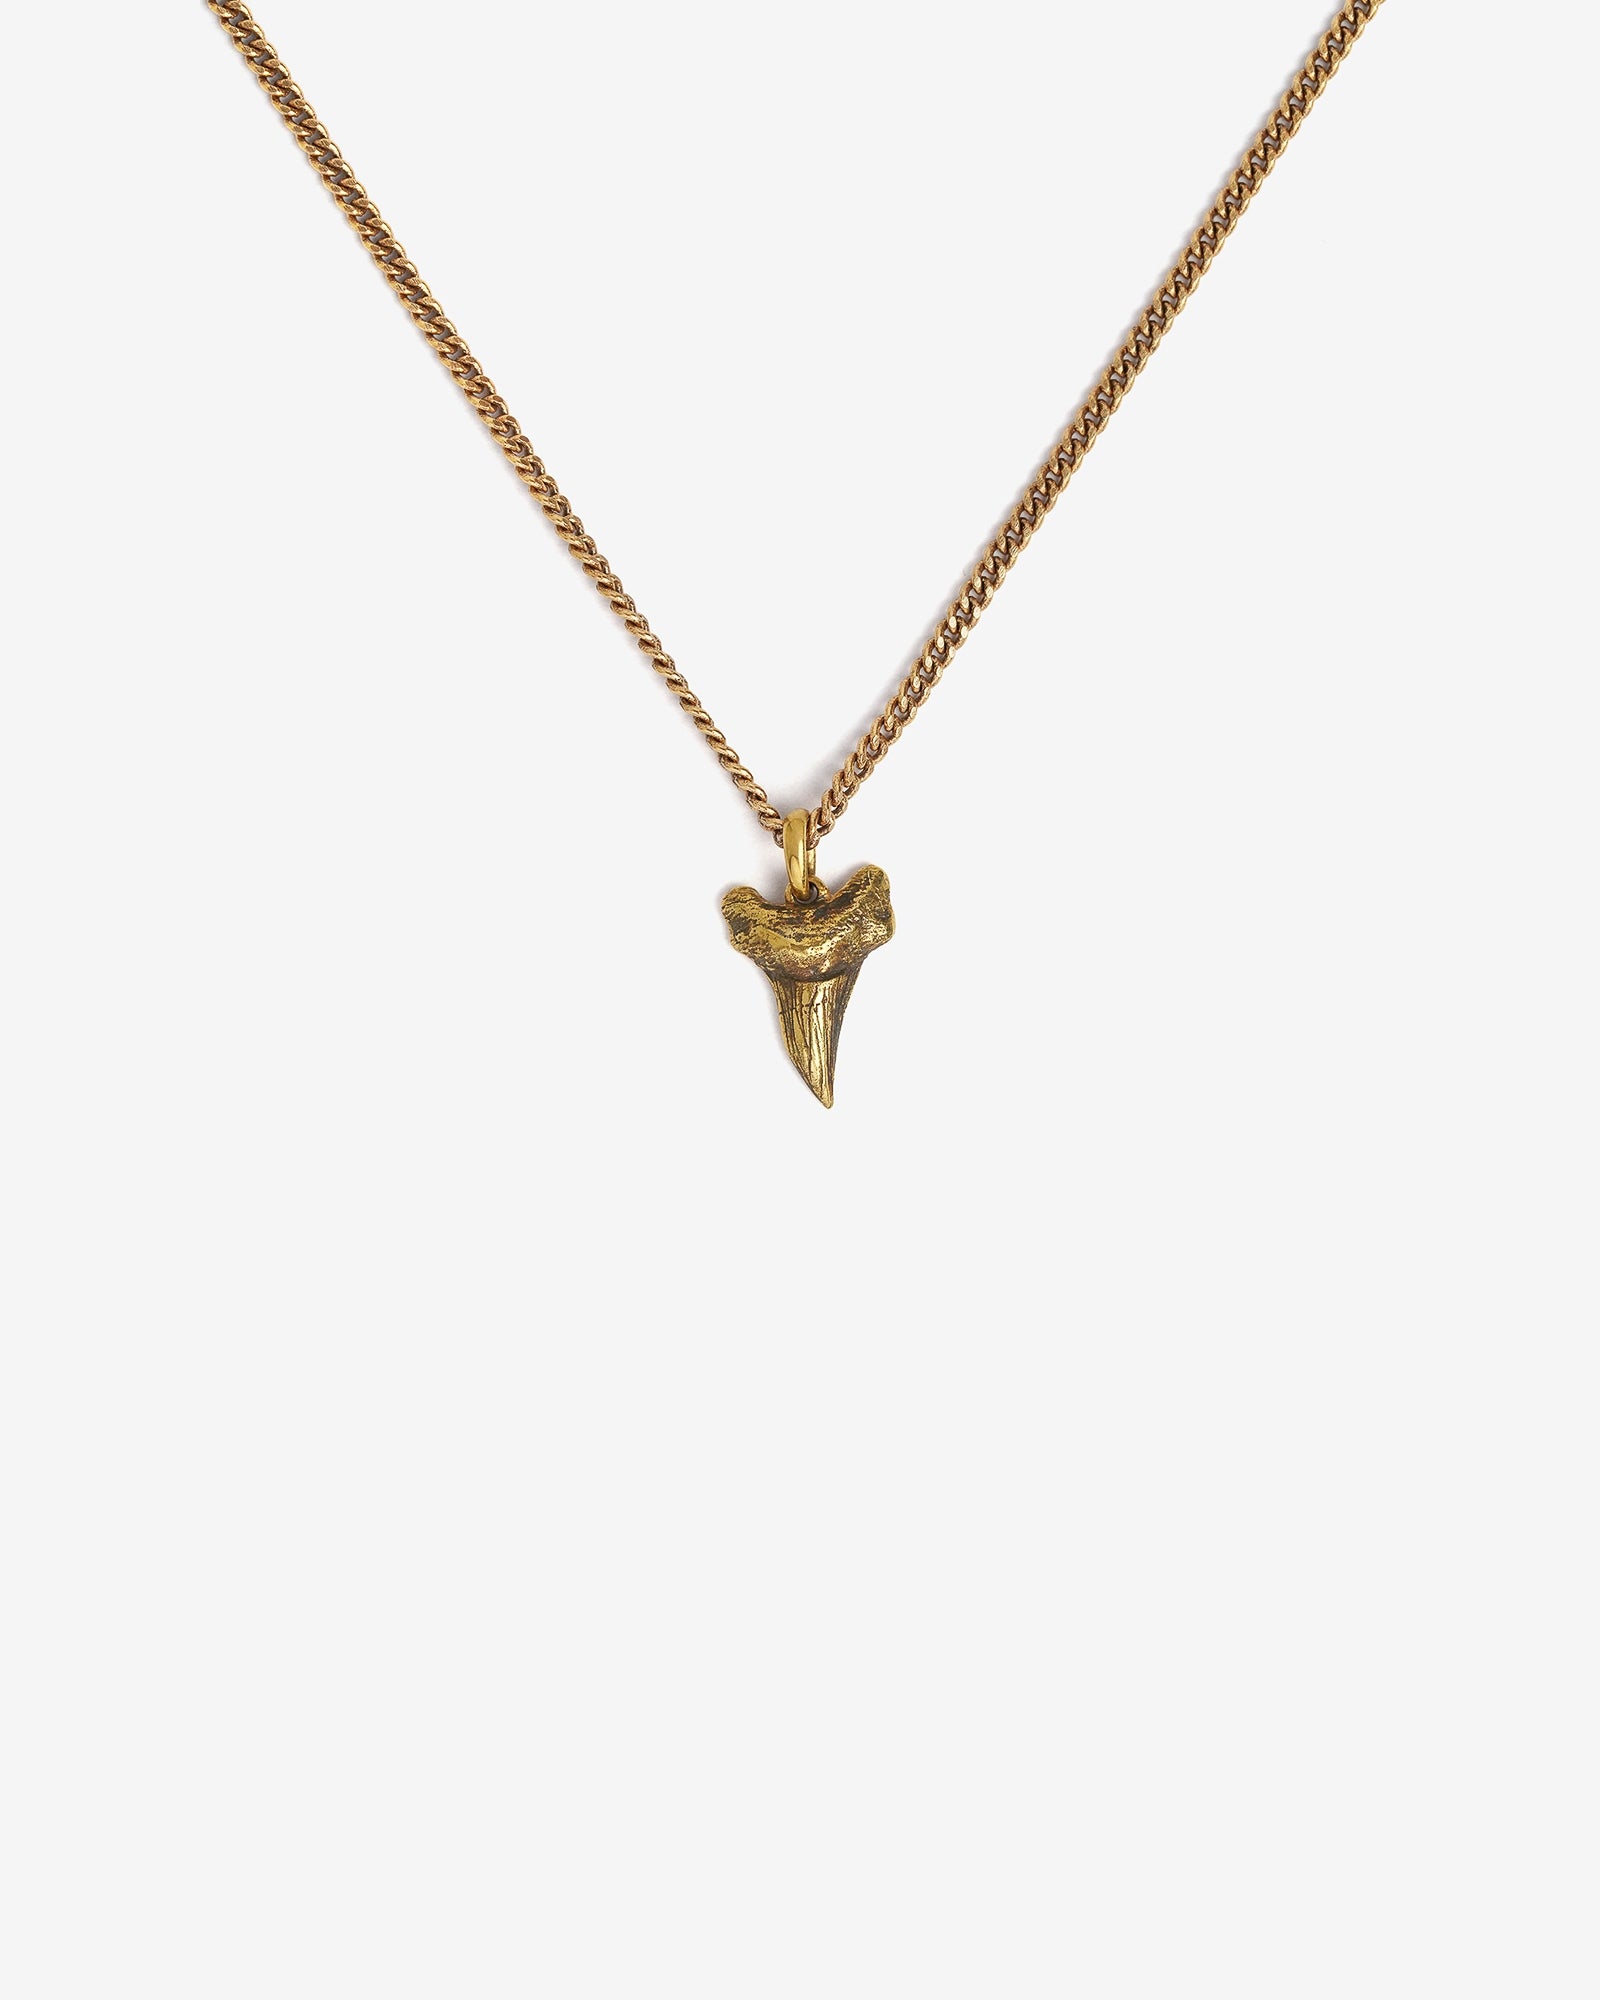 Carnivore Pendant Necklace - Necklaces - Ask and Embla